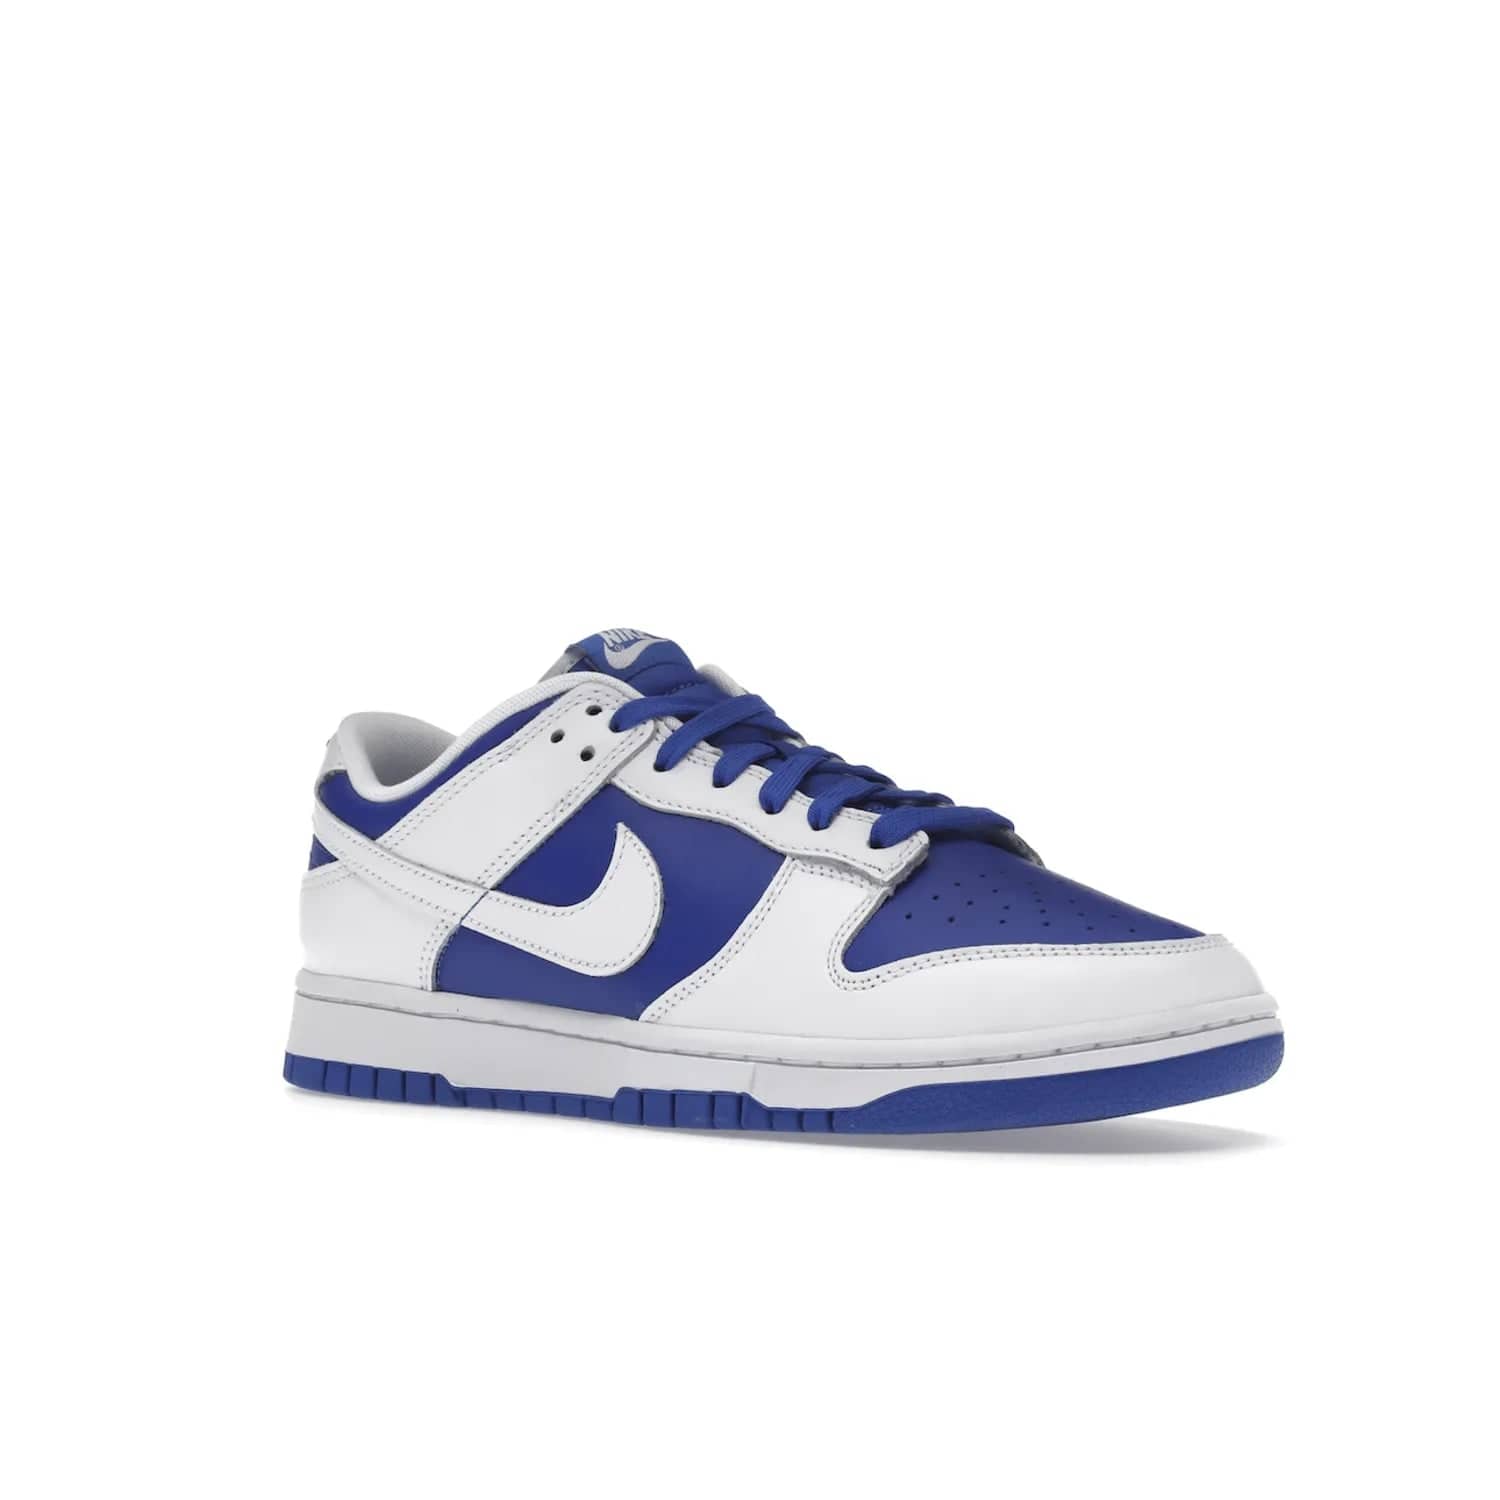 Nike Dunk Low Racer Blue White - Image 5 - Only at www.BallersClubKickz.com - Sleek Racer Blue leather upper and white leather overlays make up the Nike Dunk Low Racer Blue White. Woven tag and heel embroidery for a 1985 Dunk look with a matching EVA foam sole completes the classic colorway.